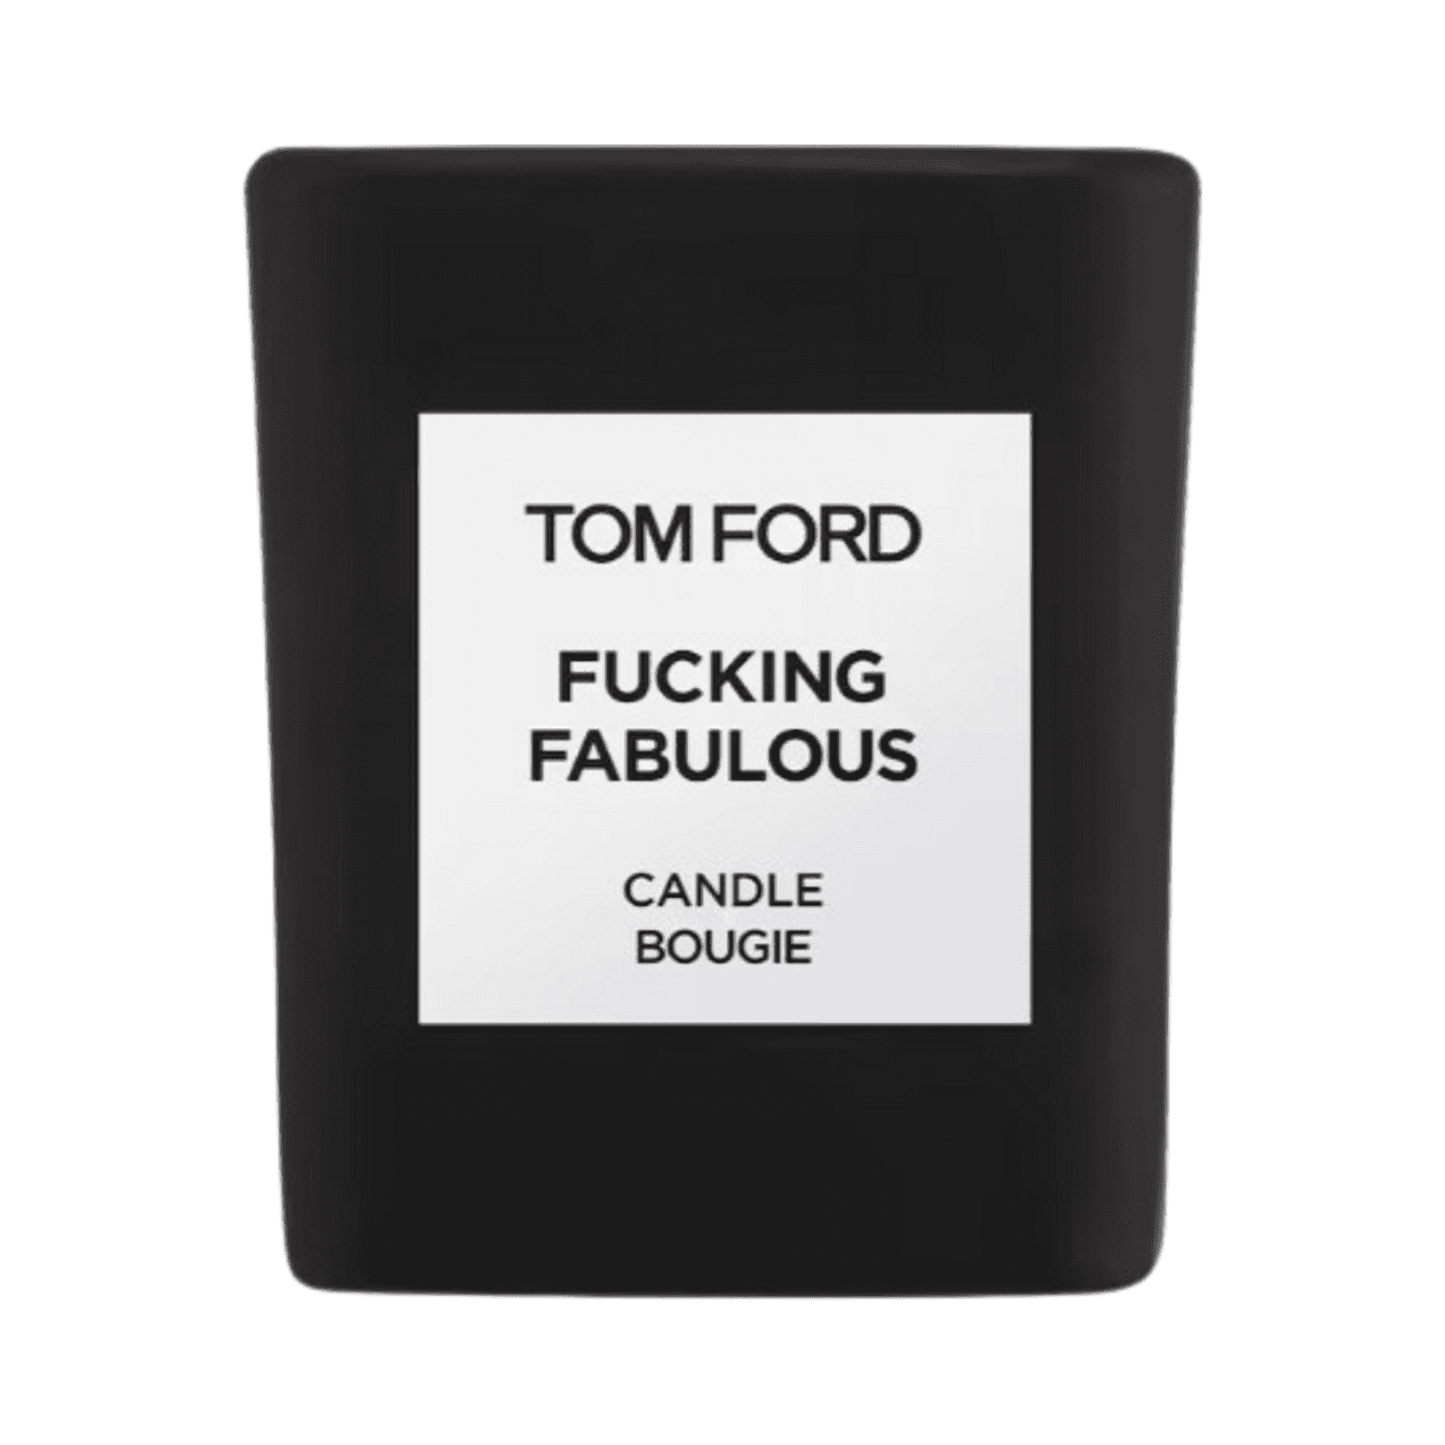 Tom Ford F'ing Fabulous Candle